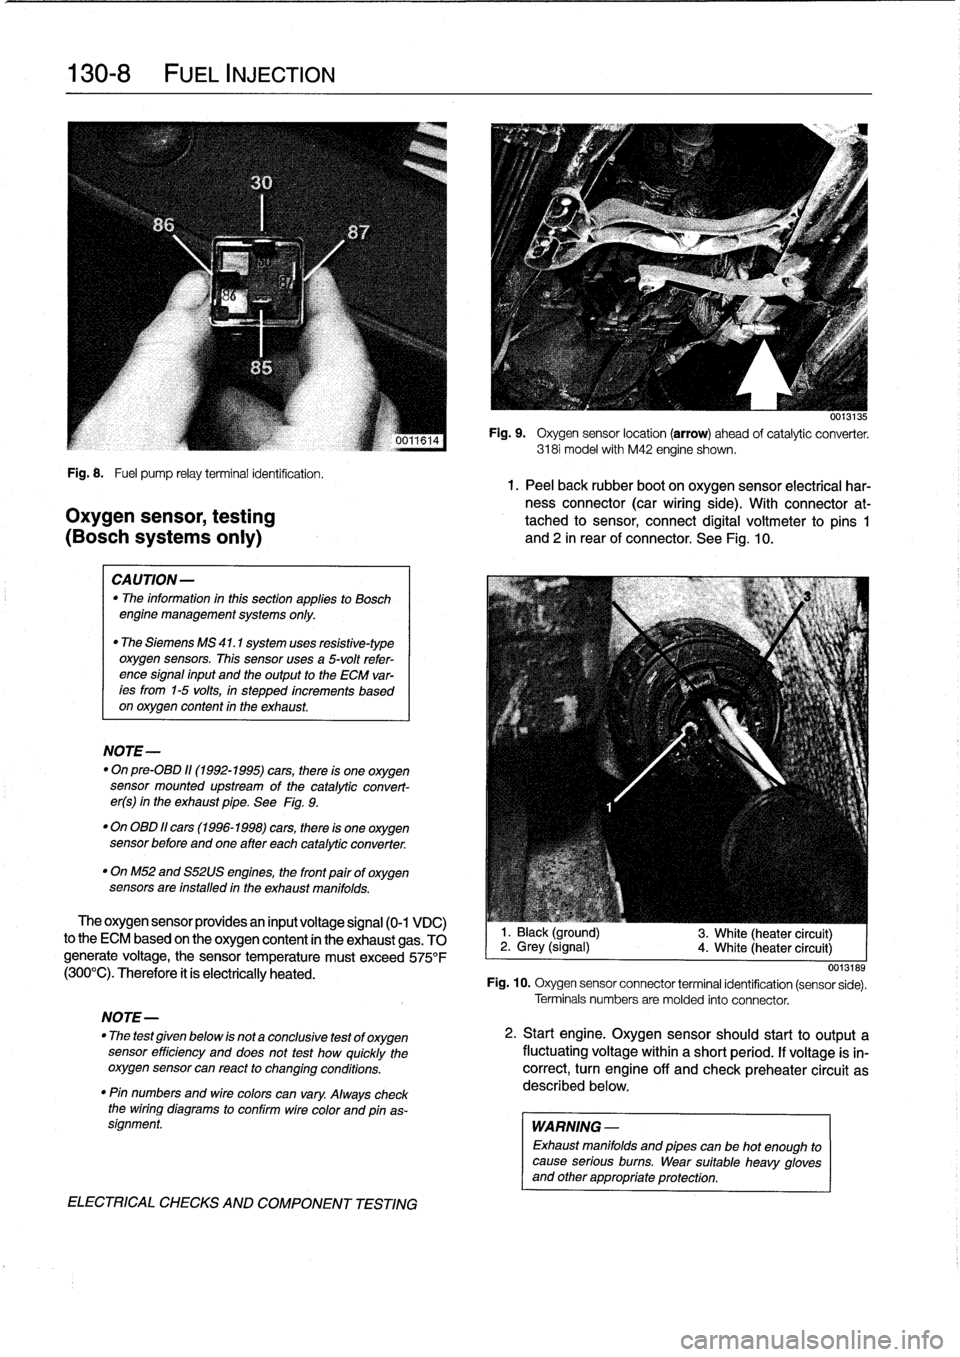 BMW 325i 1992 E36 Workshop Manual 
130-
8

	

FUEL
INJECTION

Fig
.
8
.

	

Fuel
pump
relayterminal
identification
.
1.
Peel
back
rubber
boot
on
oxygen
sensor
electrical
har-
ness
connector
(car
wiring
side)
.
With
connector
at-
Oxyge